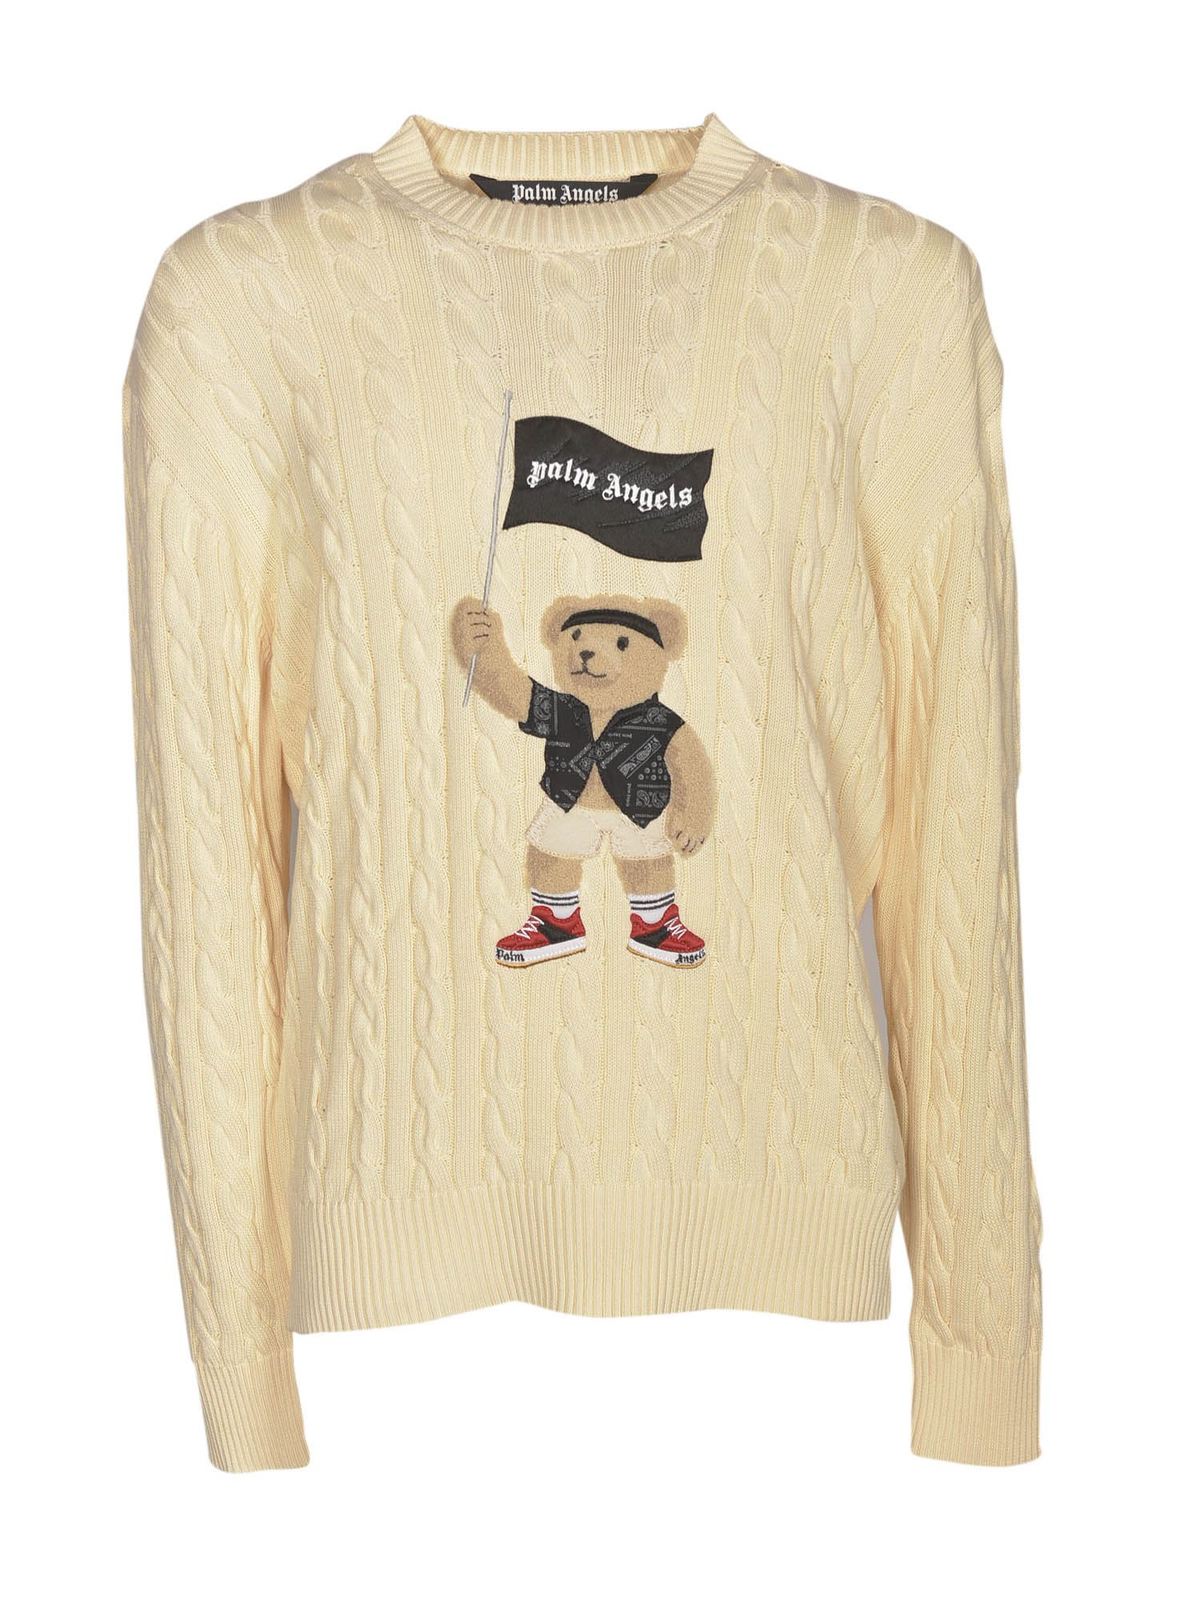 PALM ANGELS PIRATE BEAR SWEATER IN CREAM COLOR